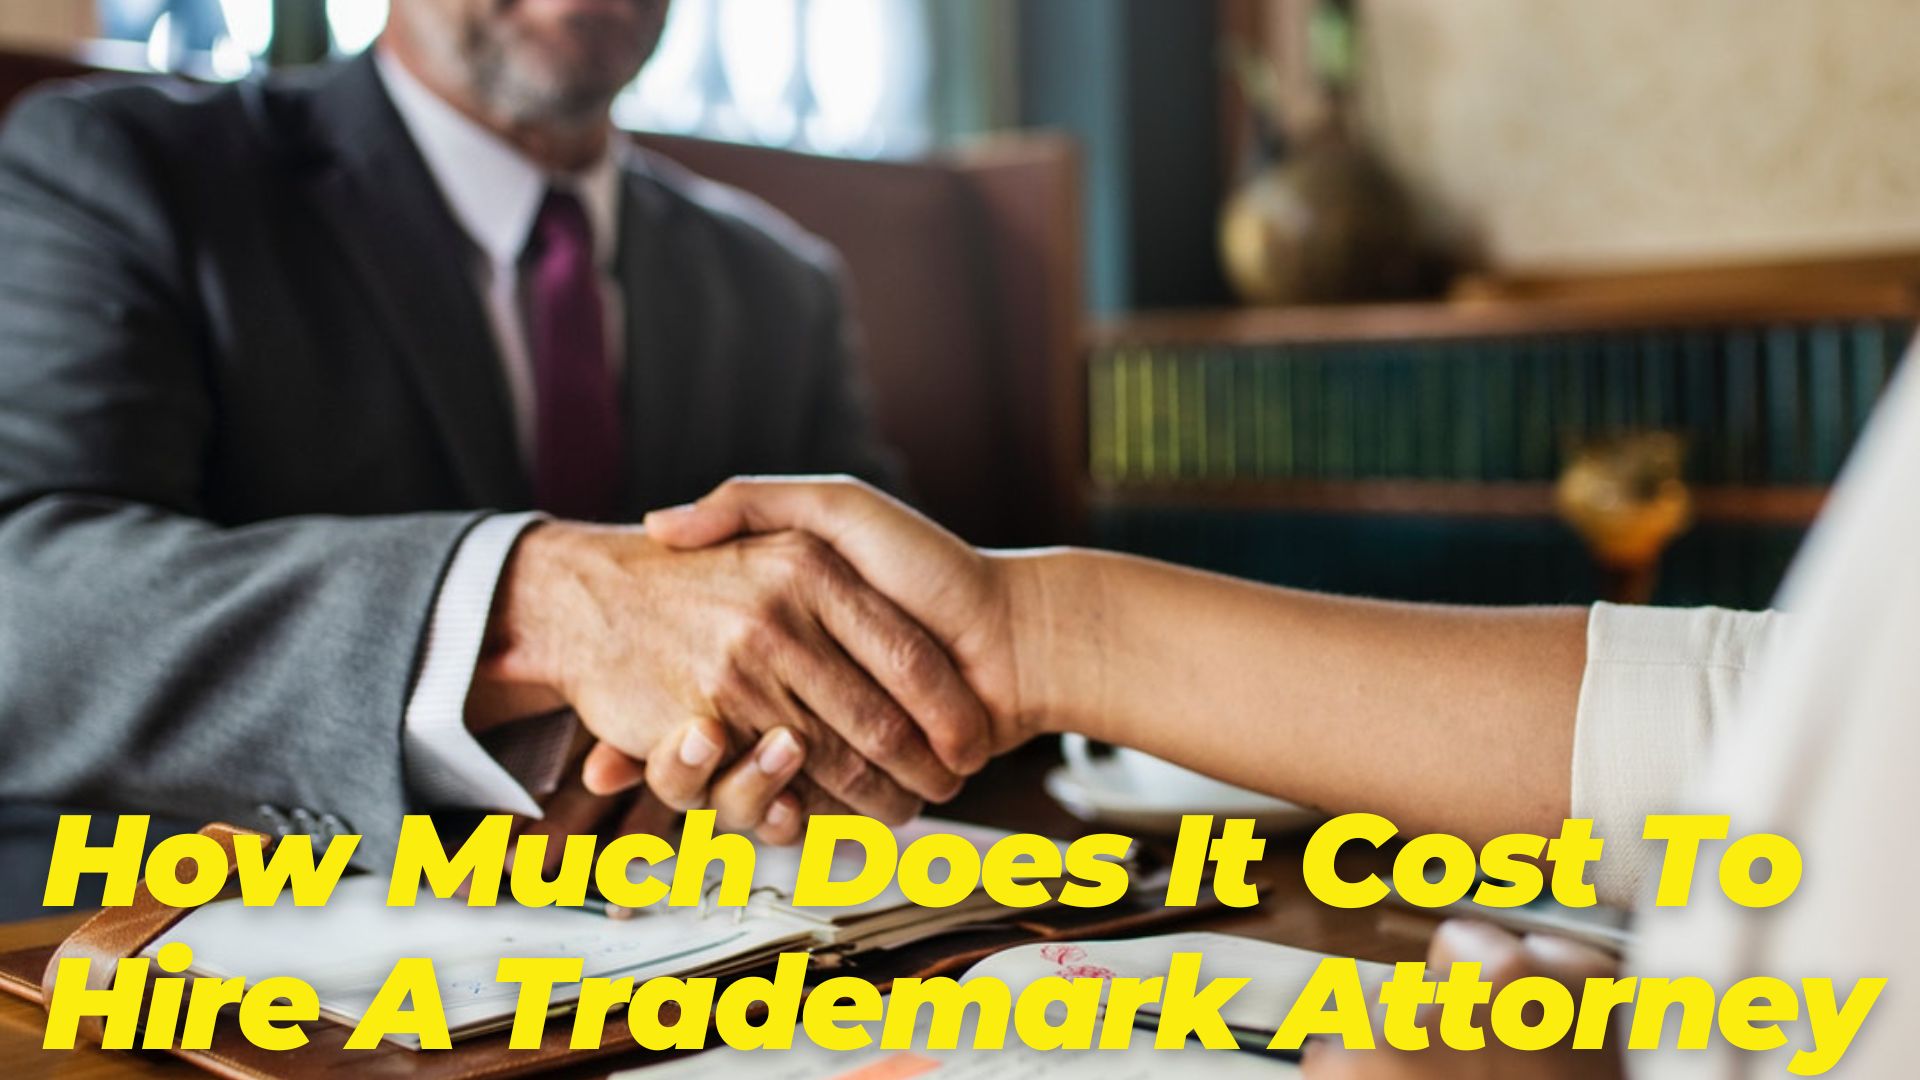 How Much Does It Cost To Hire A Trademark Attorney